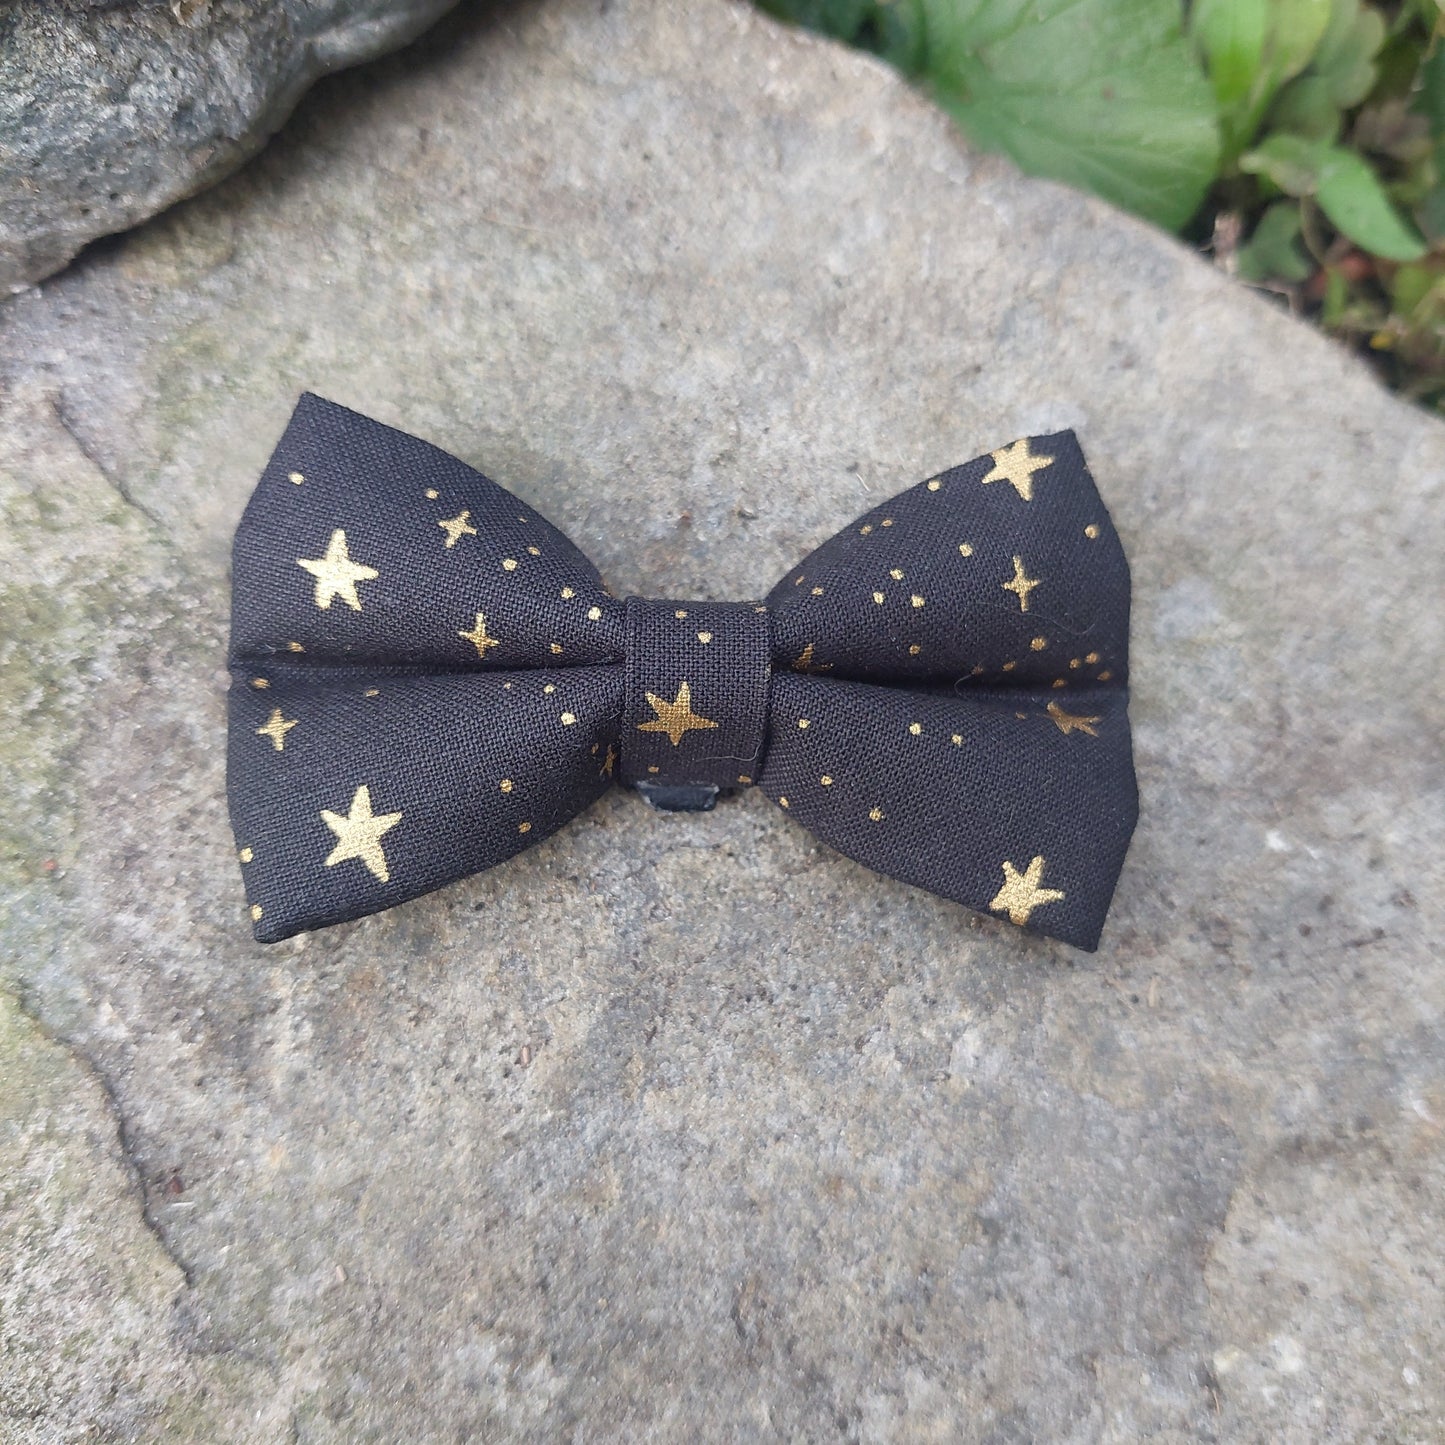 Moonlight Cat Bow Tie - Black and Gold